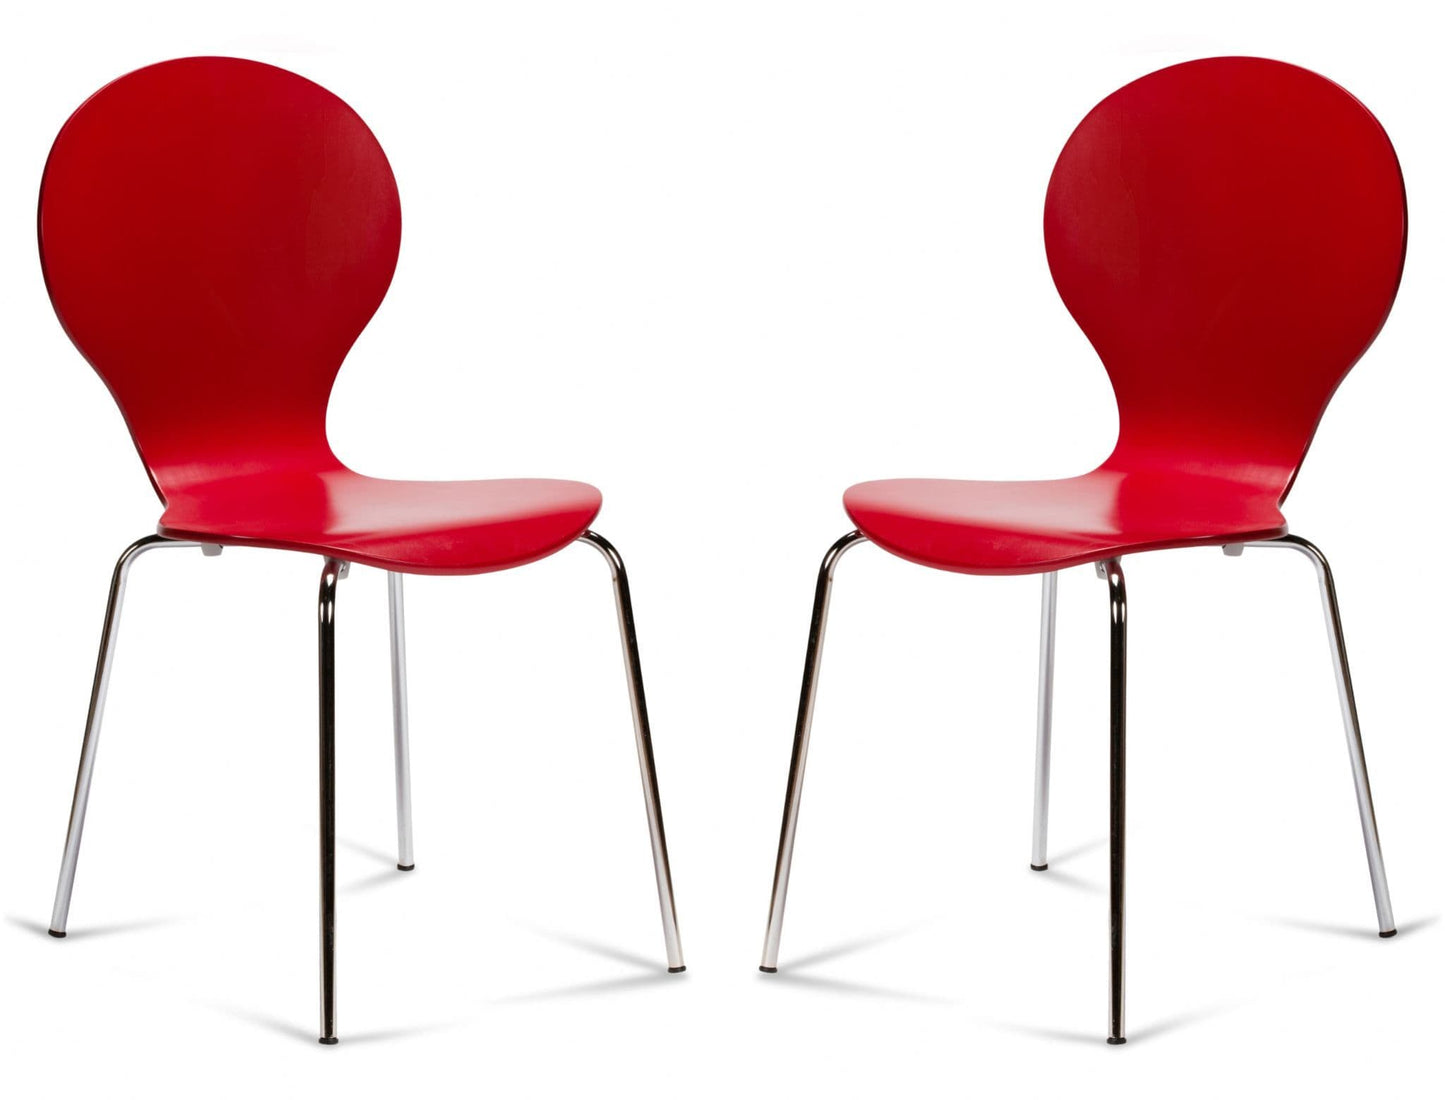 2 Kimberley Red & Chrome Dining Chairs